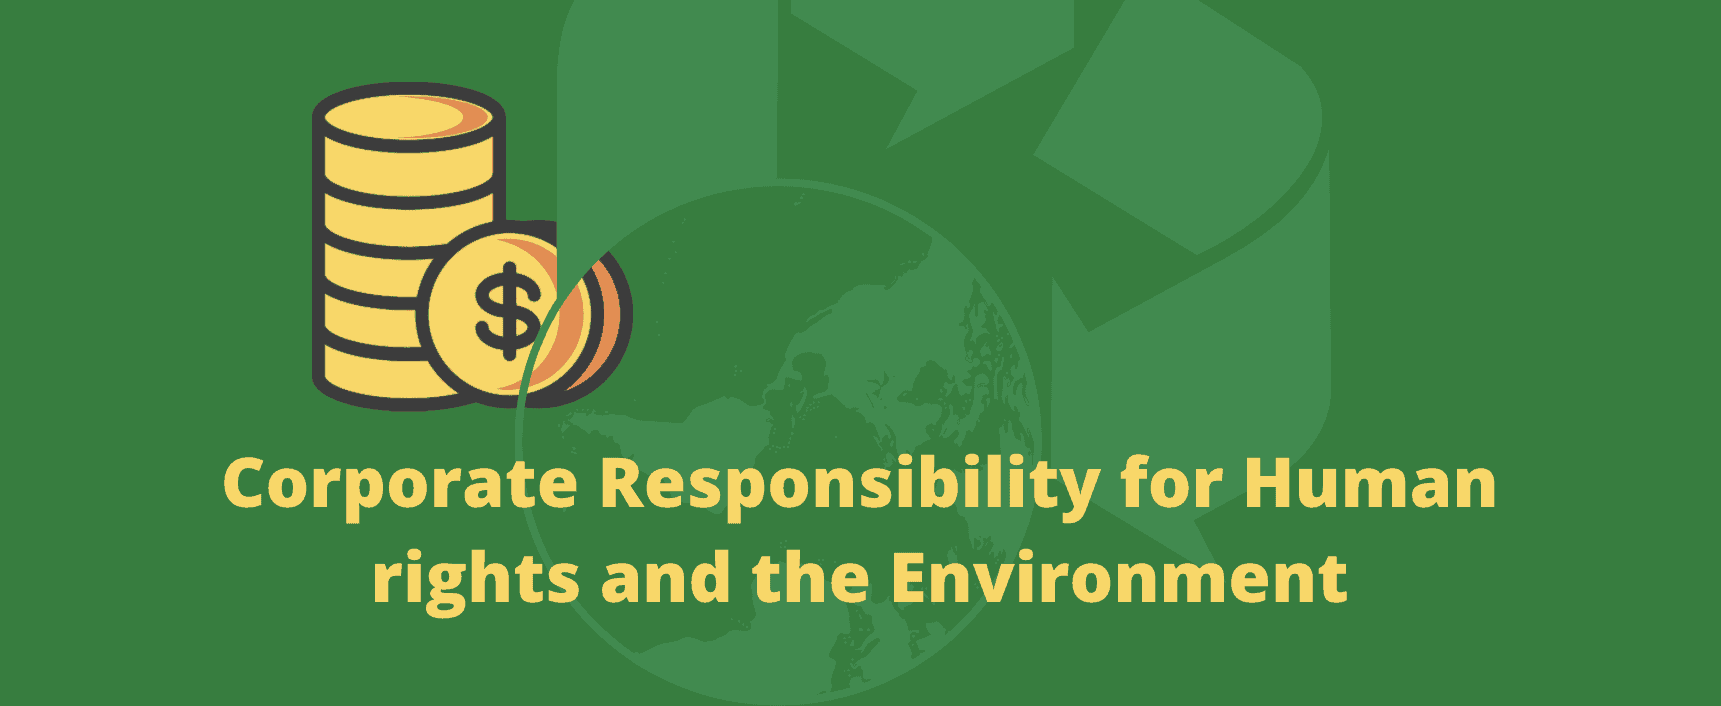 Corporate social responsibility for human rights and the environment